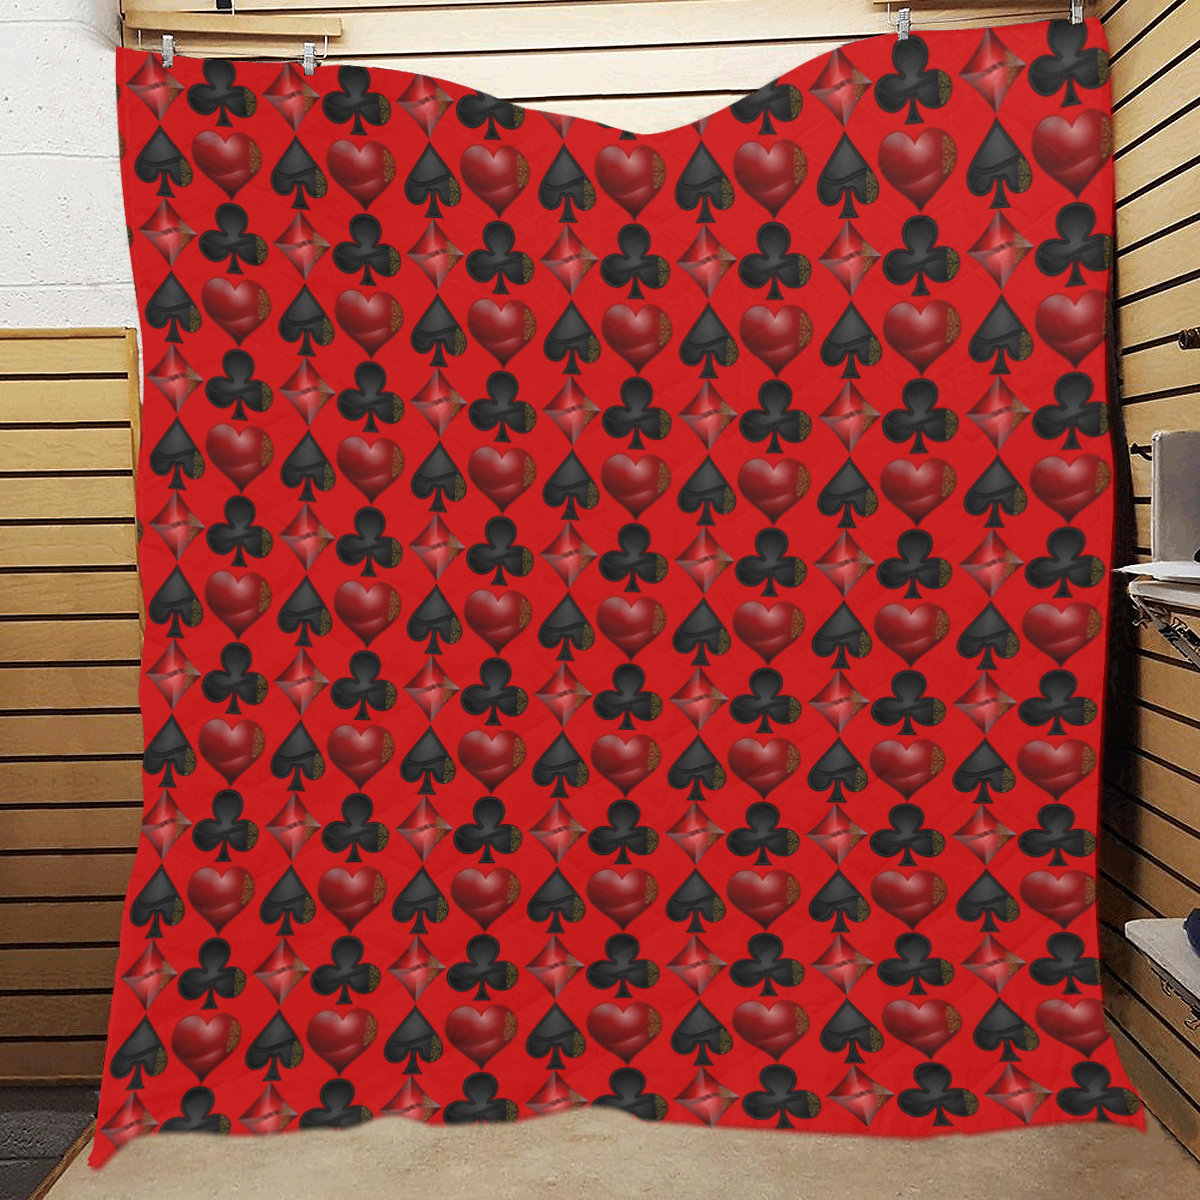 Las Vegas Black and Red Casino Poker Card Shapes on Red Quilt 60"x70"